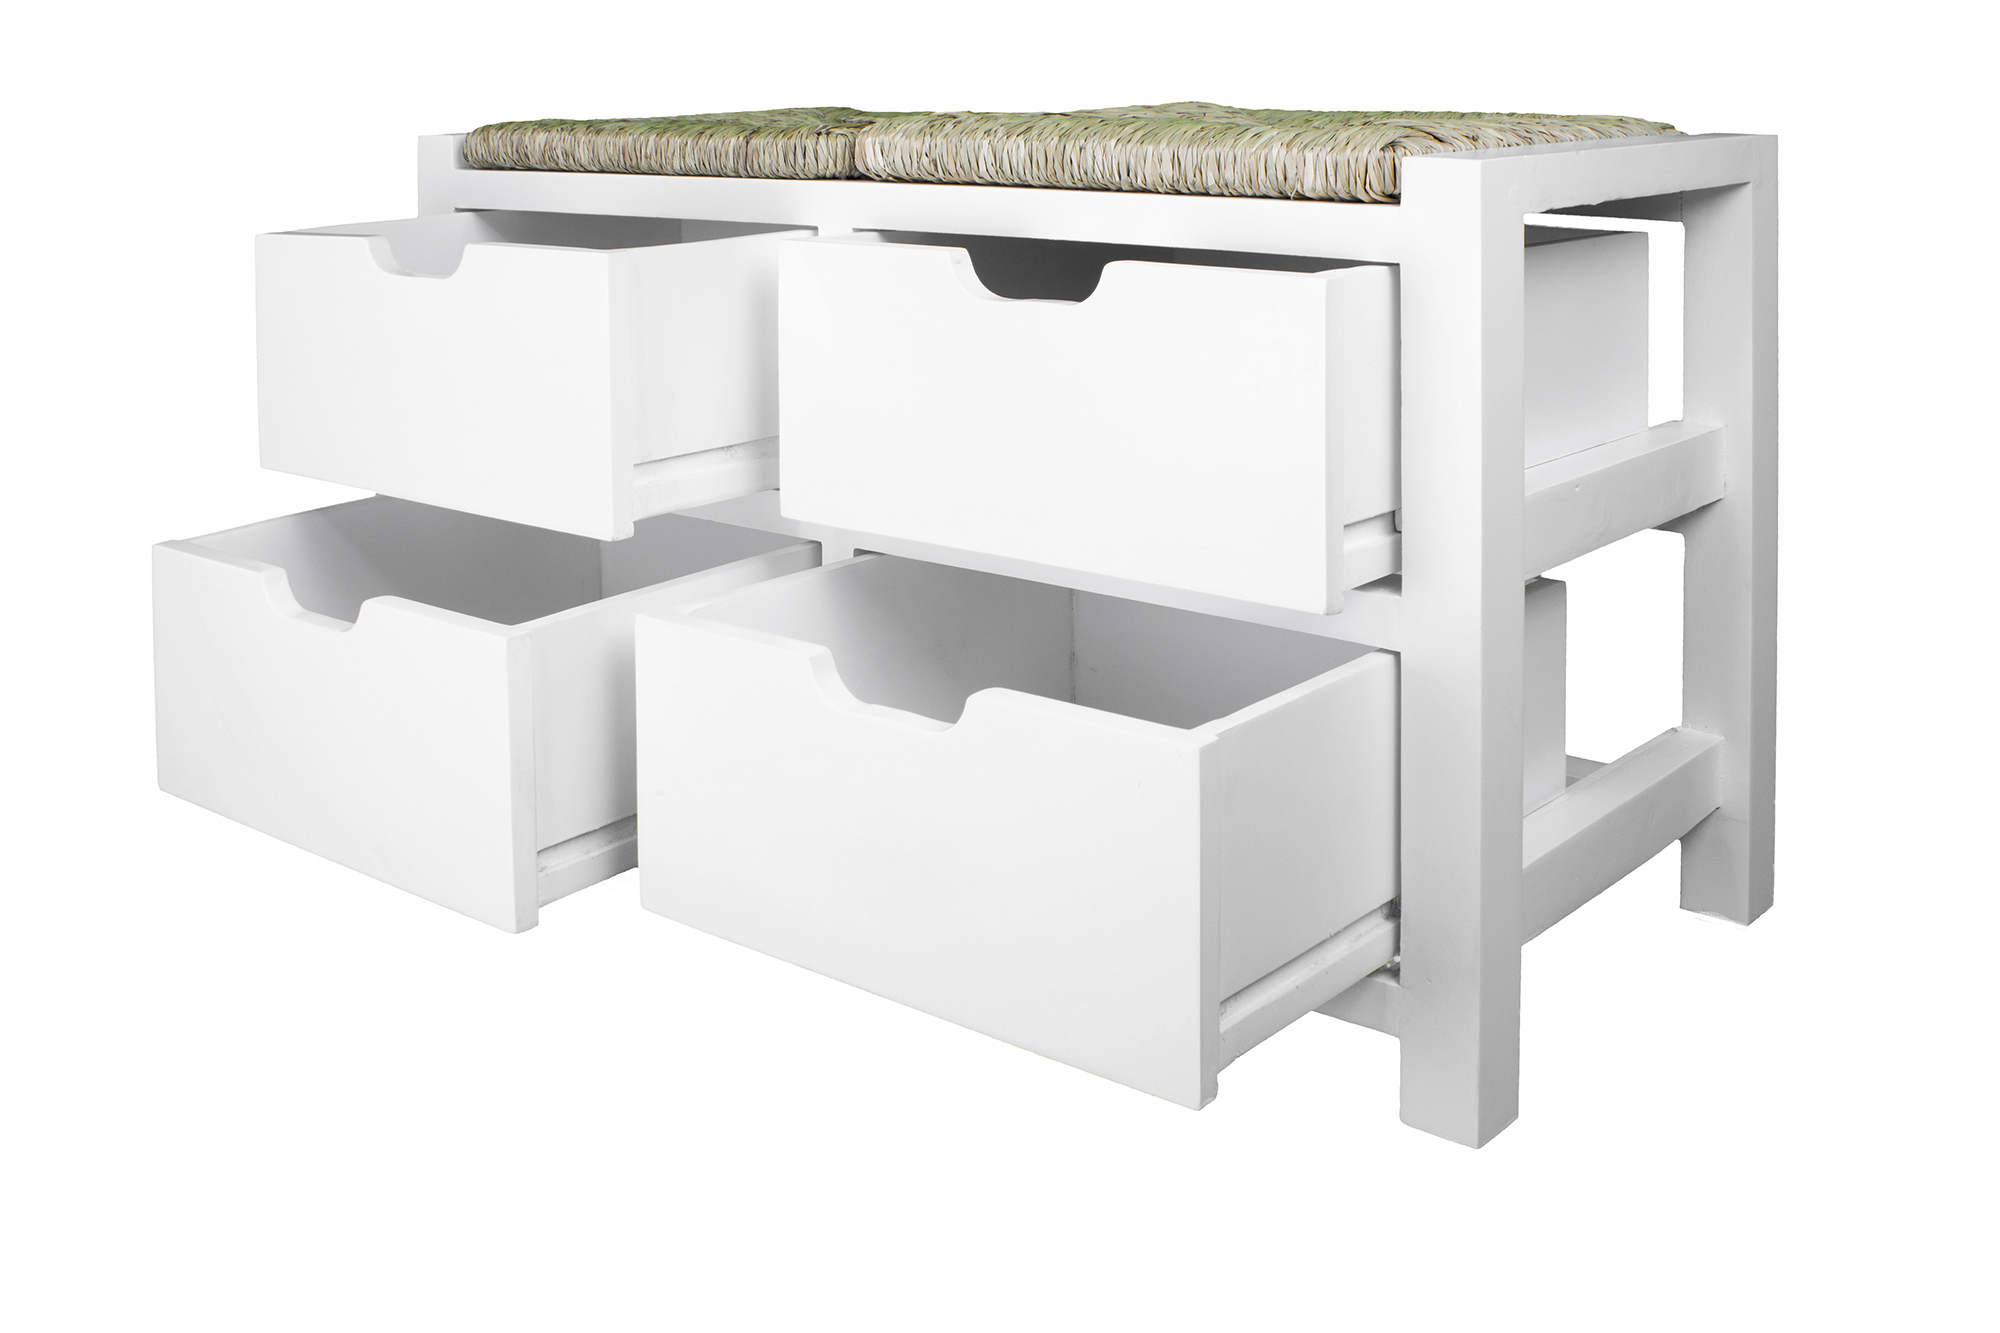 32" X 15" X 21" White W Natural Sea Grass Wood MDF Seagrass Bench with Drawers and a Seagrass Top